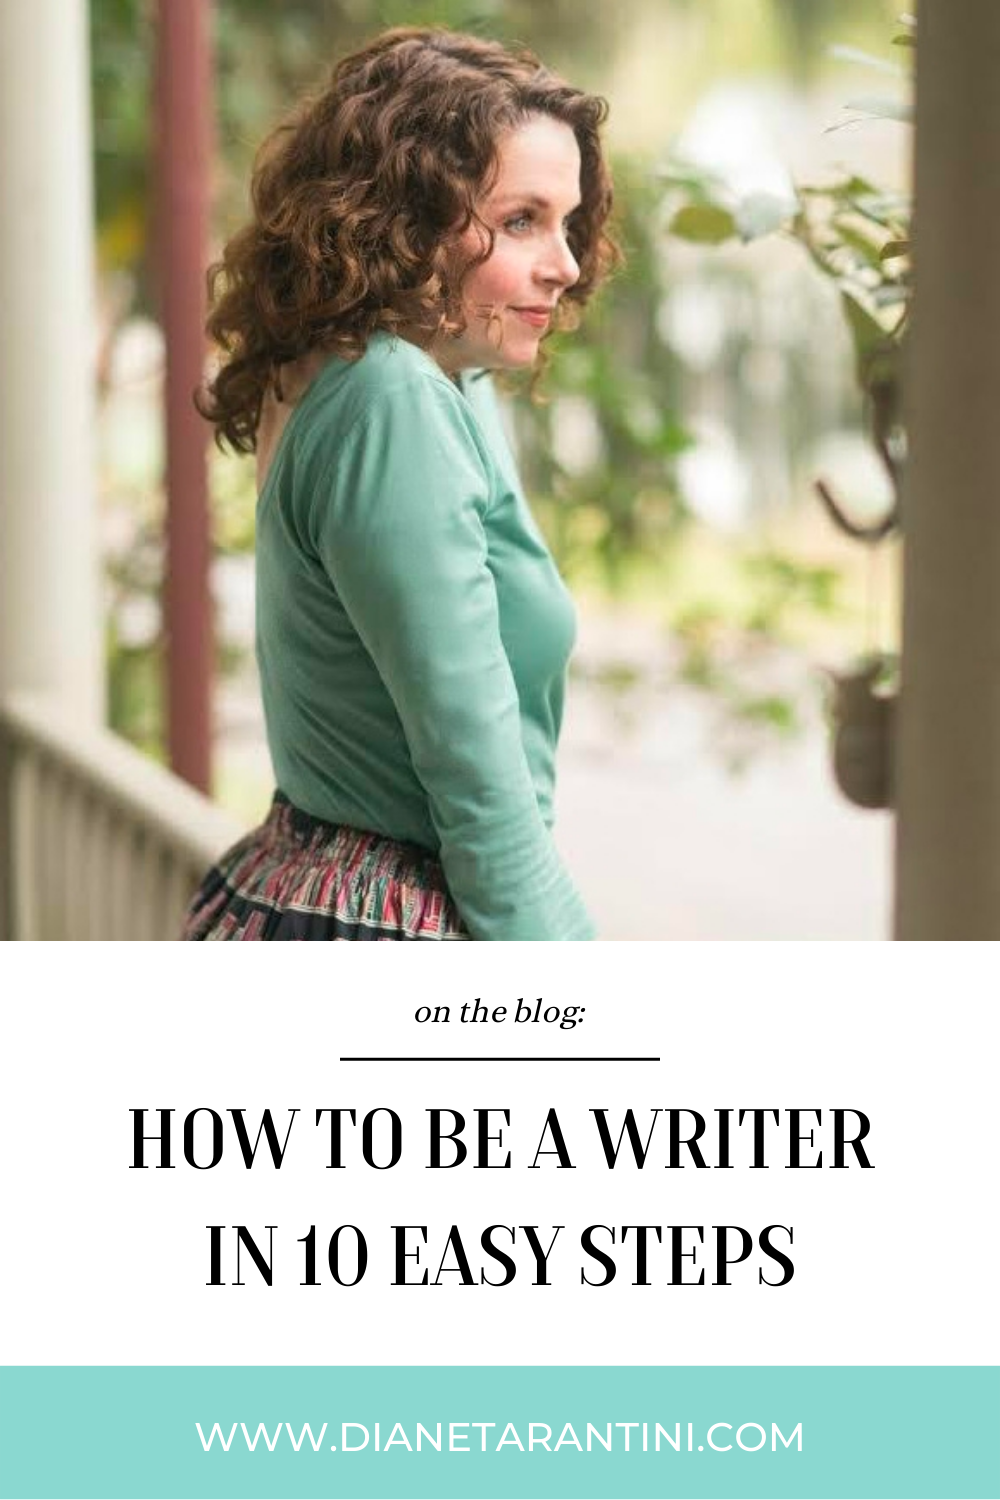 Ten Tips For Being a Writer - what I learned when I published my first book